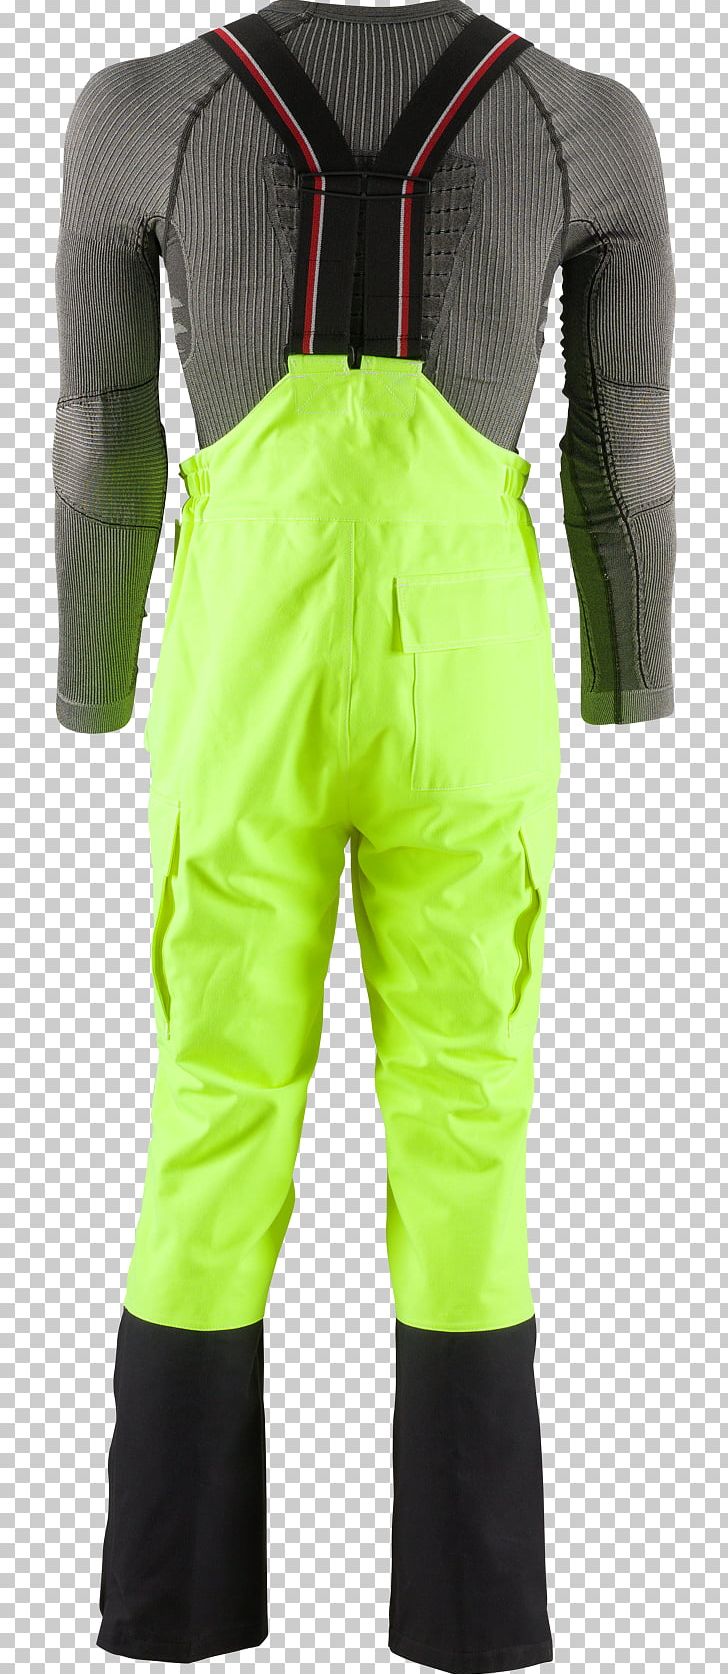 Dry Suit Green Motorcycle Clothing PNG, Clipart, August, Cars, Clothing, Dry Suit, Green Free PNG Download